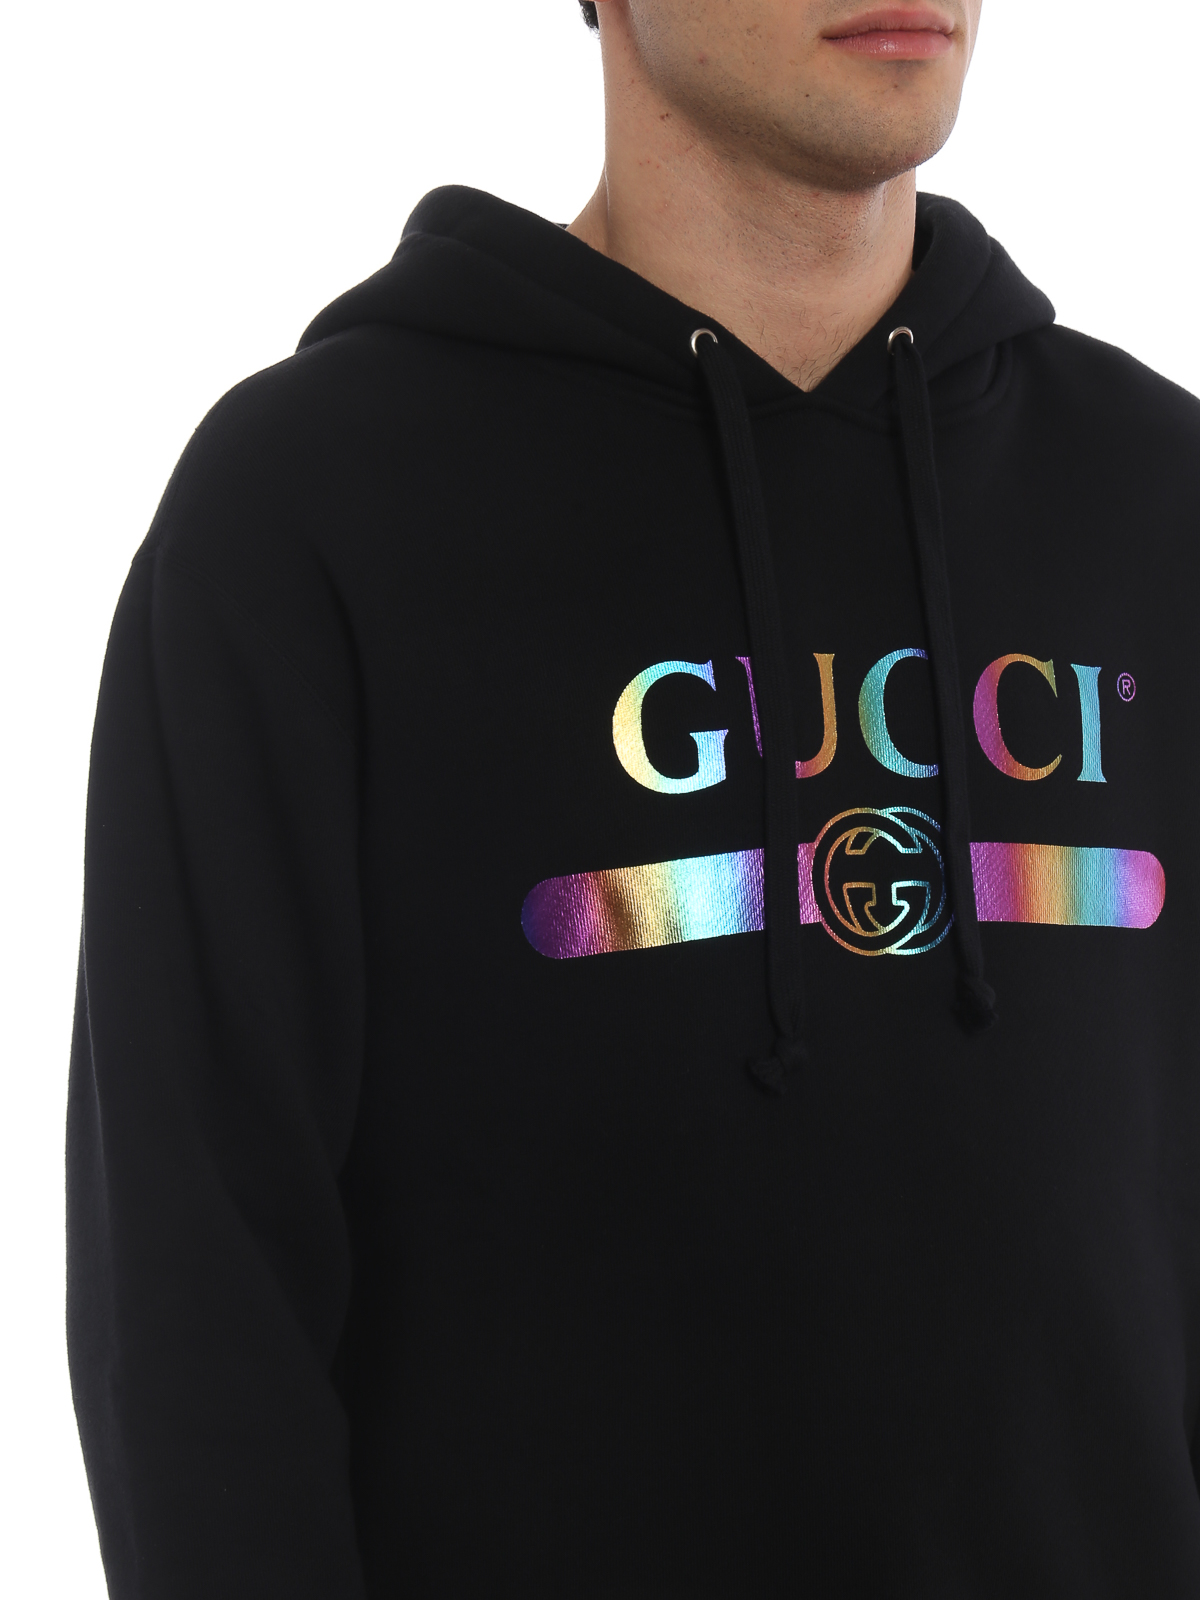 how much does a gucci sweatshirt cost